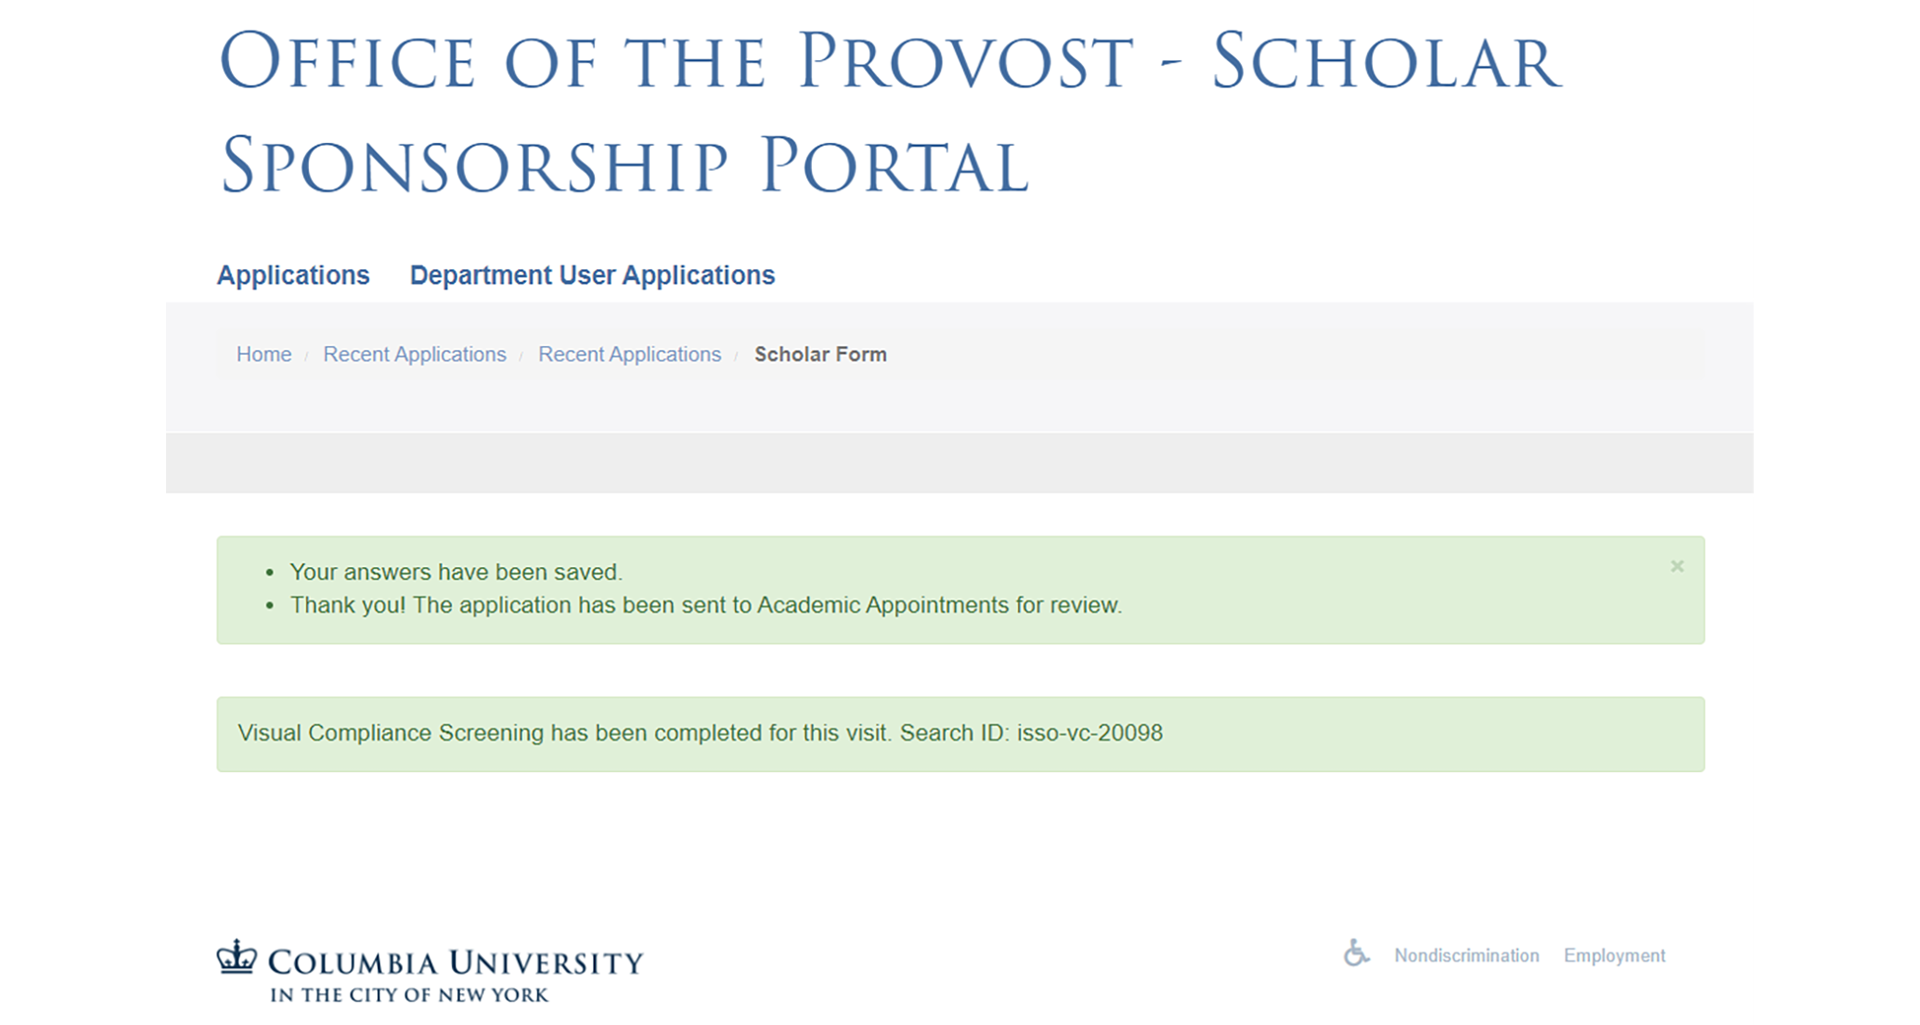 Office of the Provost page confirming review